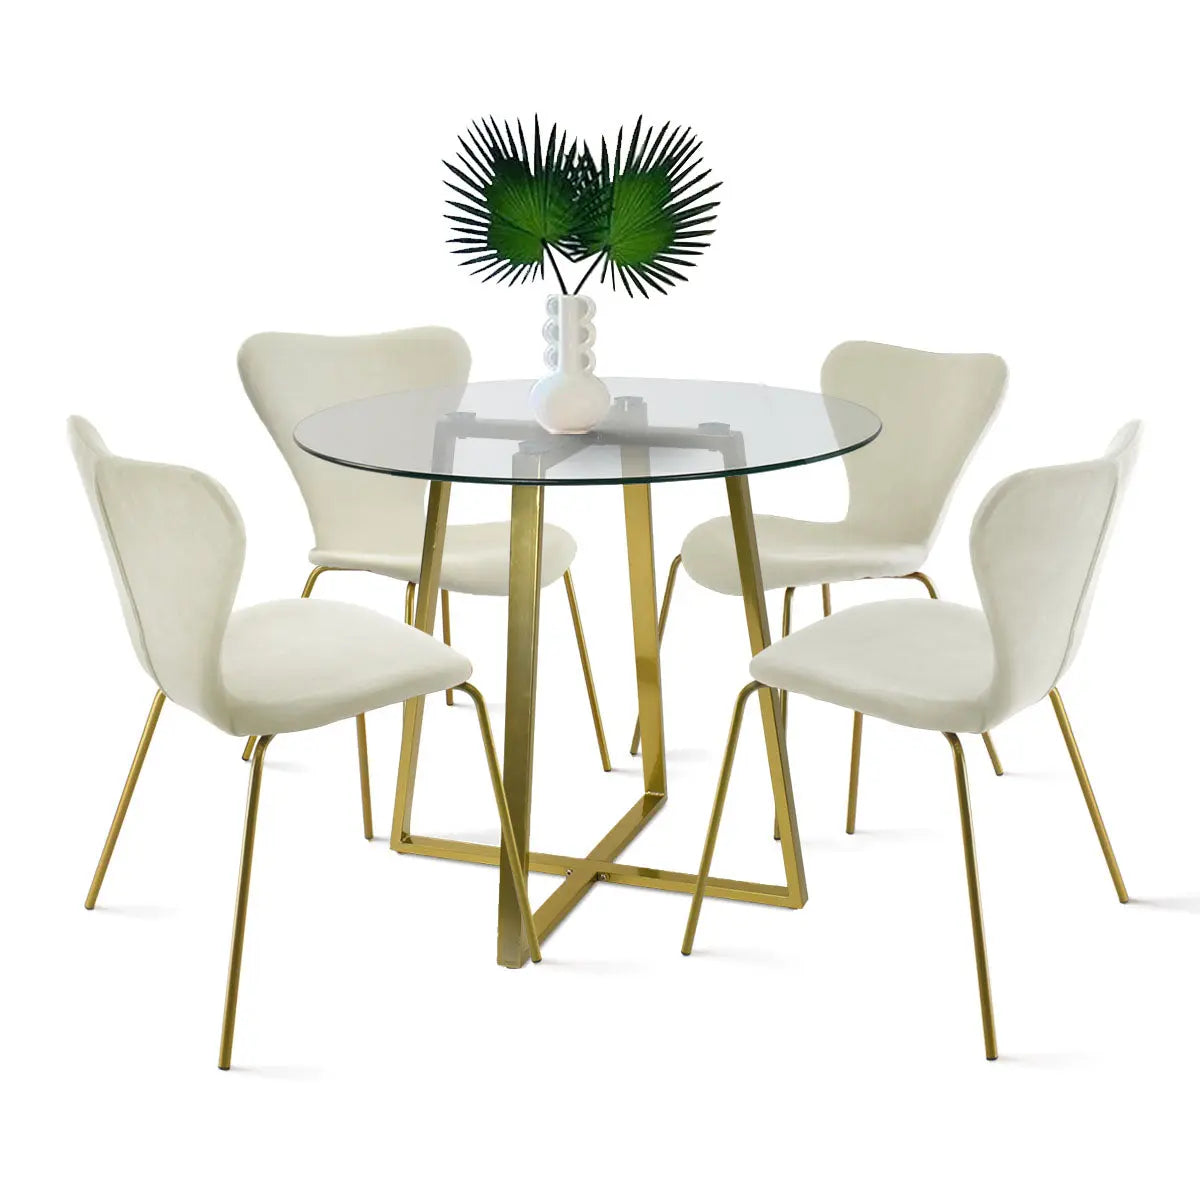 Flavia 4 - Person Glass Dining Set